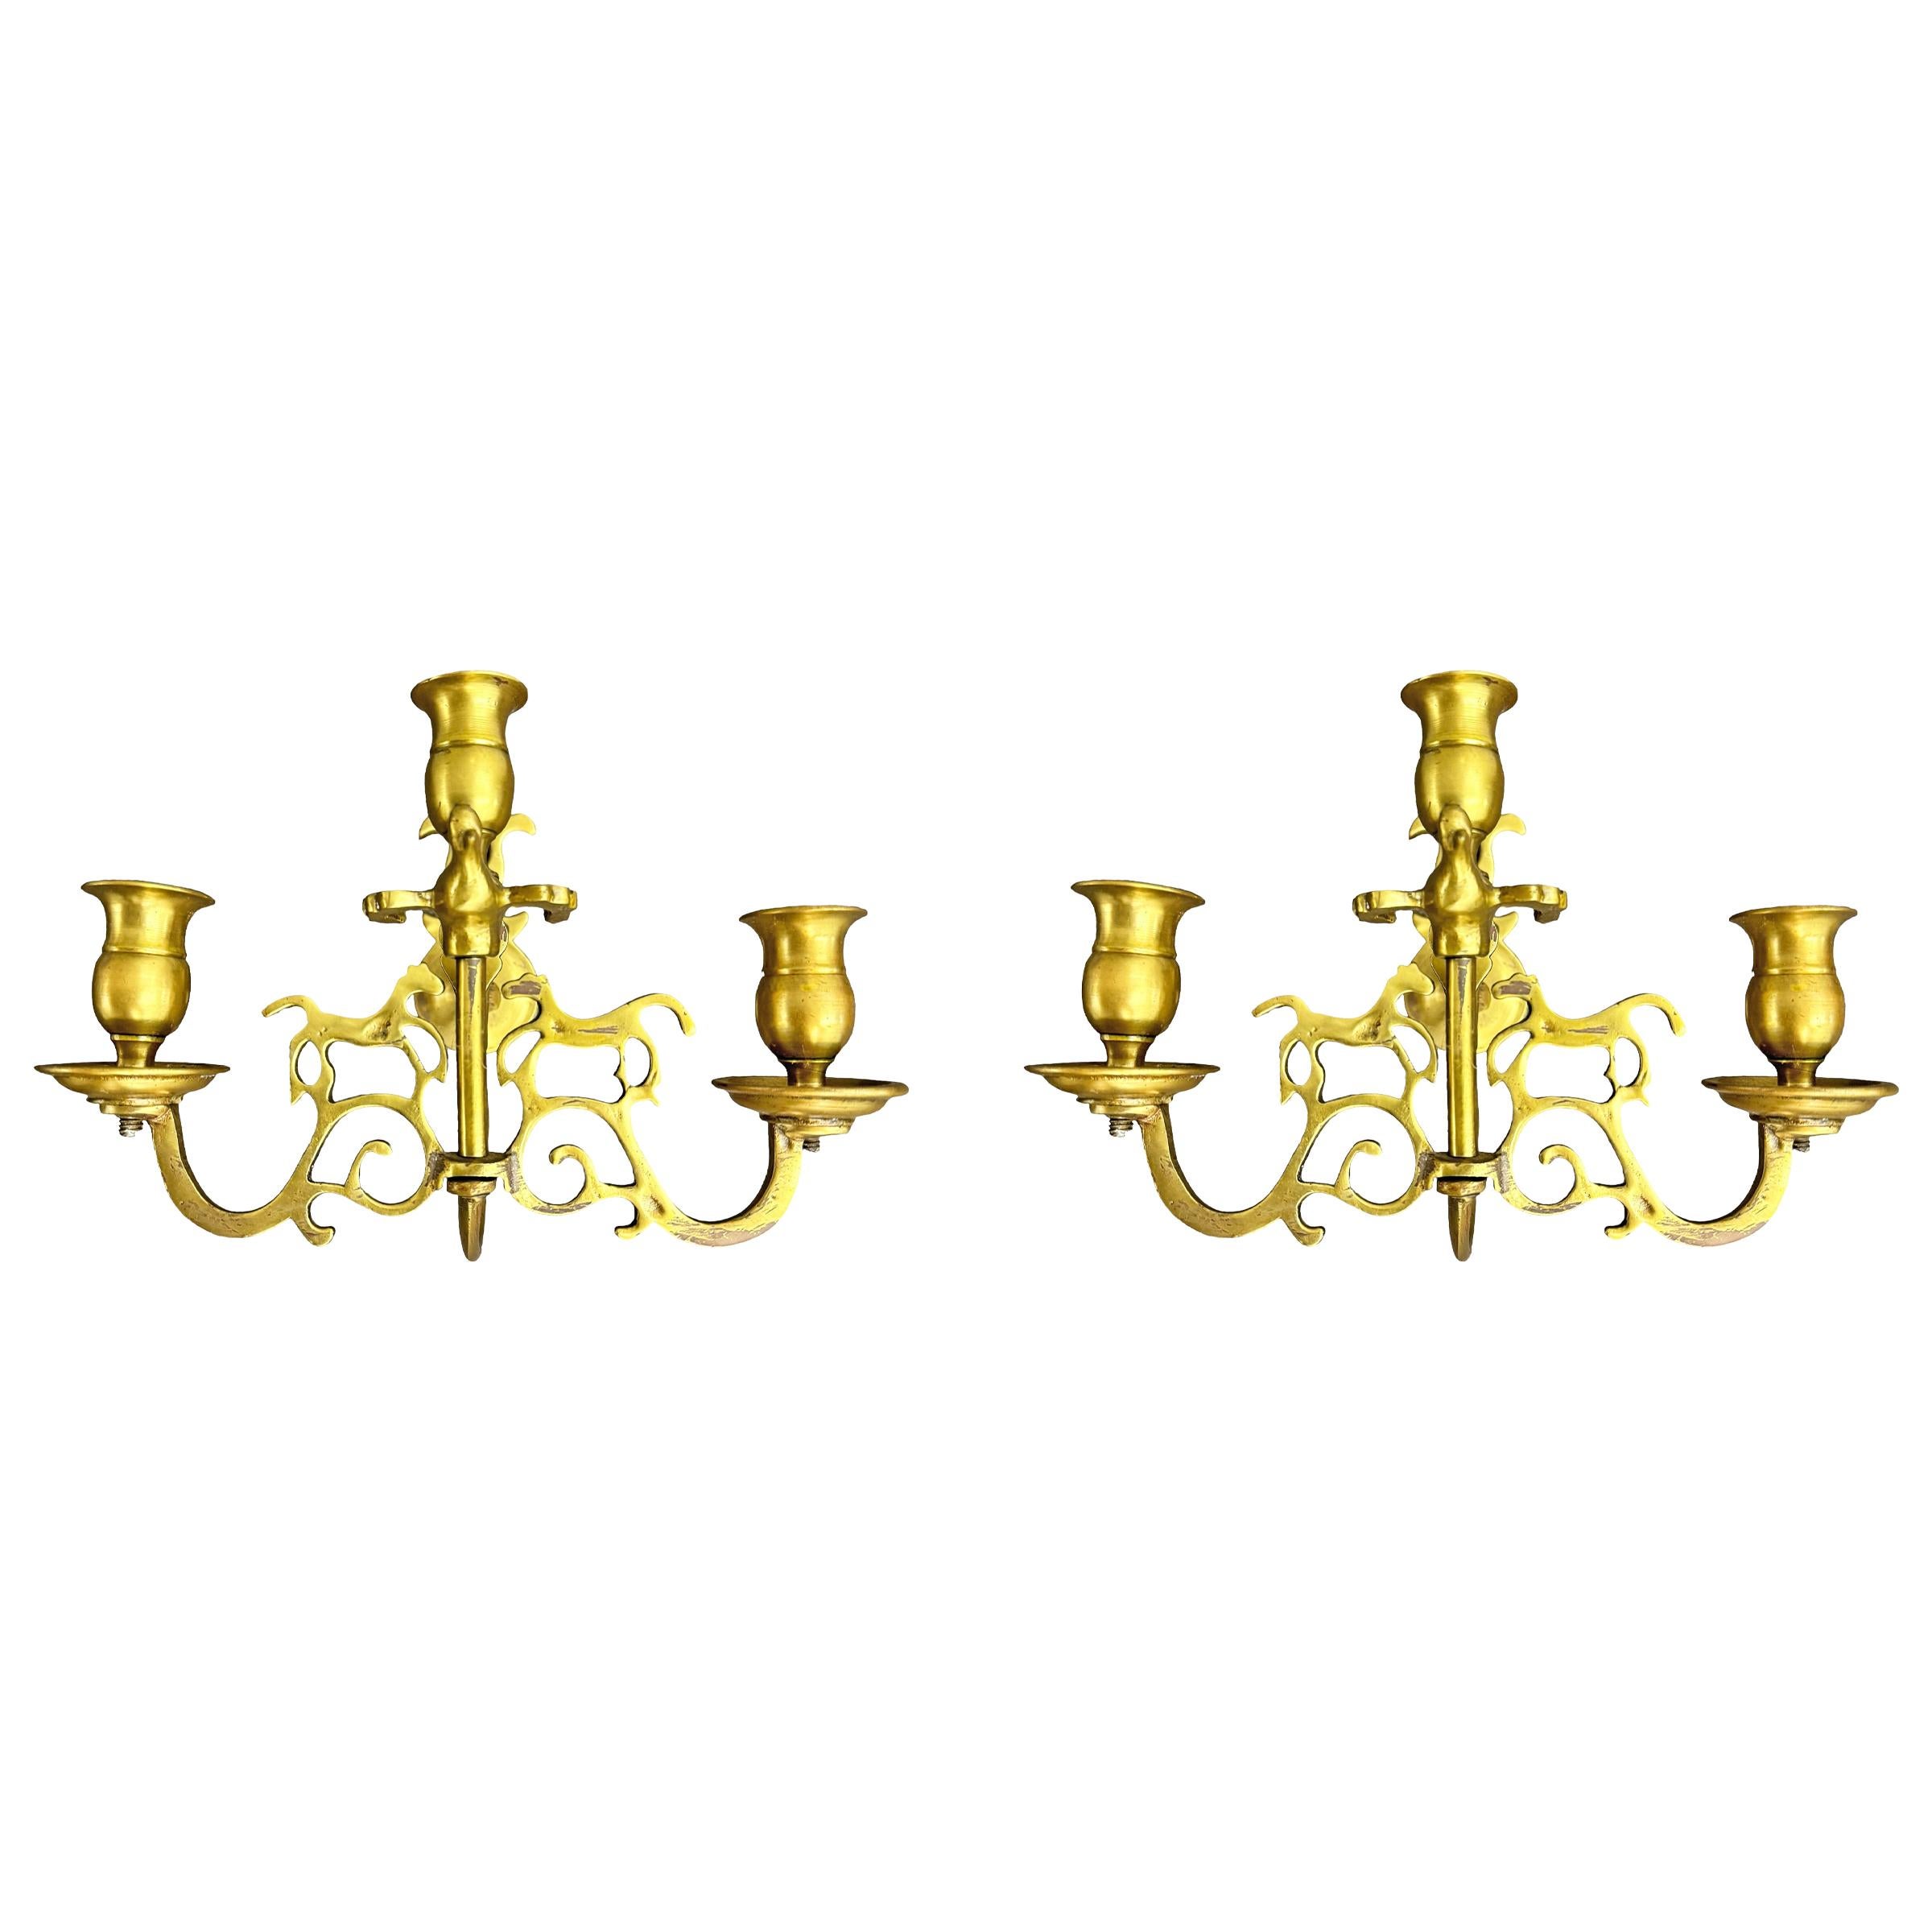 Hand-Crafted Pair of 18th Century English Georgian Brass Candle Sconces For Sale